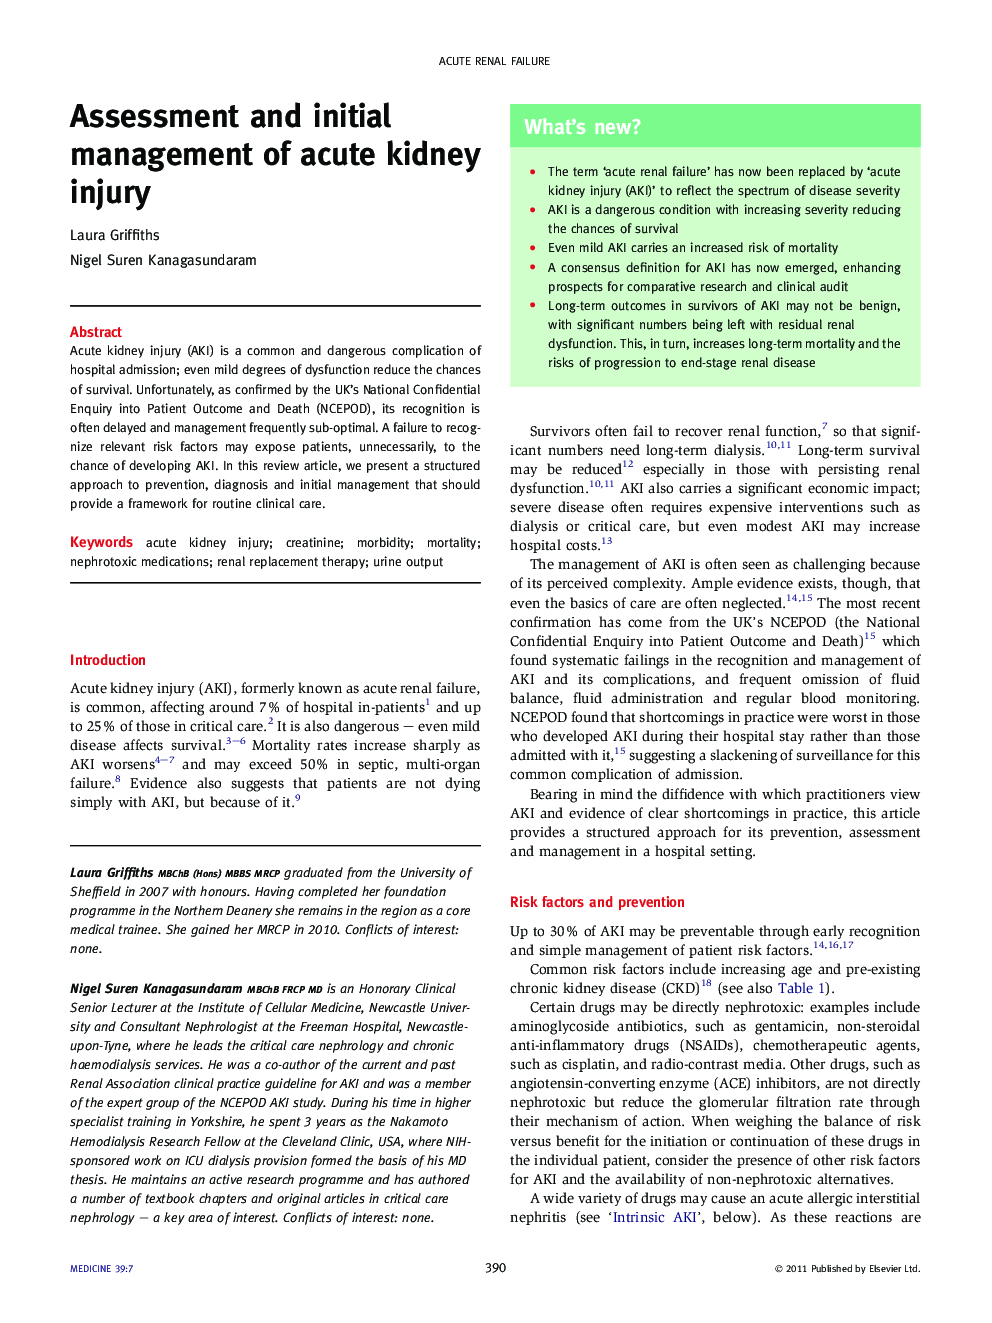 Assessment and initial management of acute kidney injury